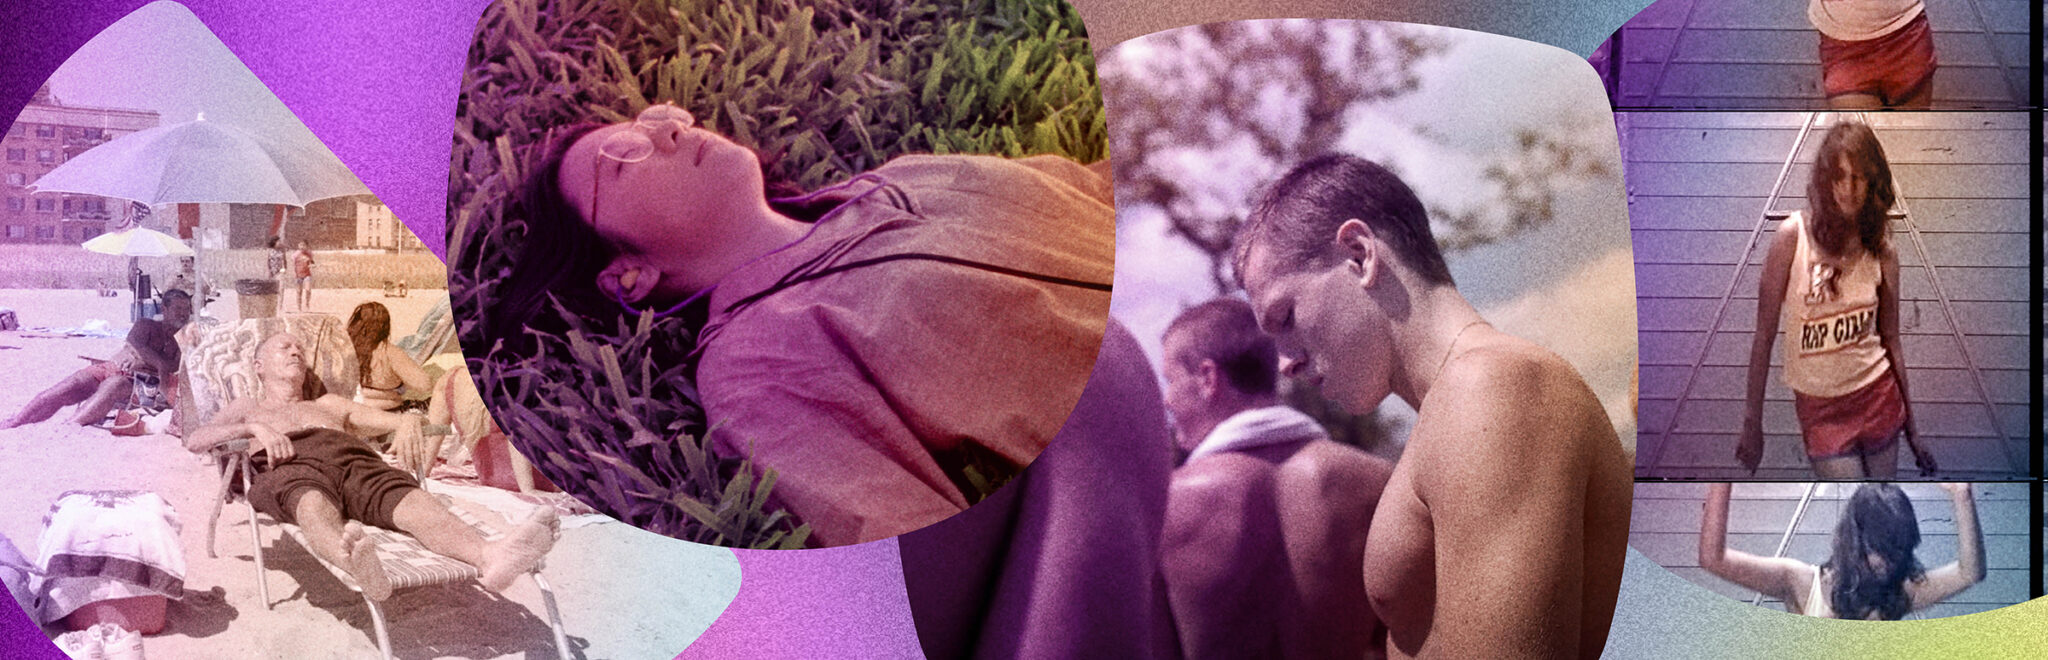 Banner image featuring film stills from The Hottest August, Shirkers, Beach Rats and Matangi, Maya, M.I.A.